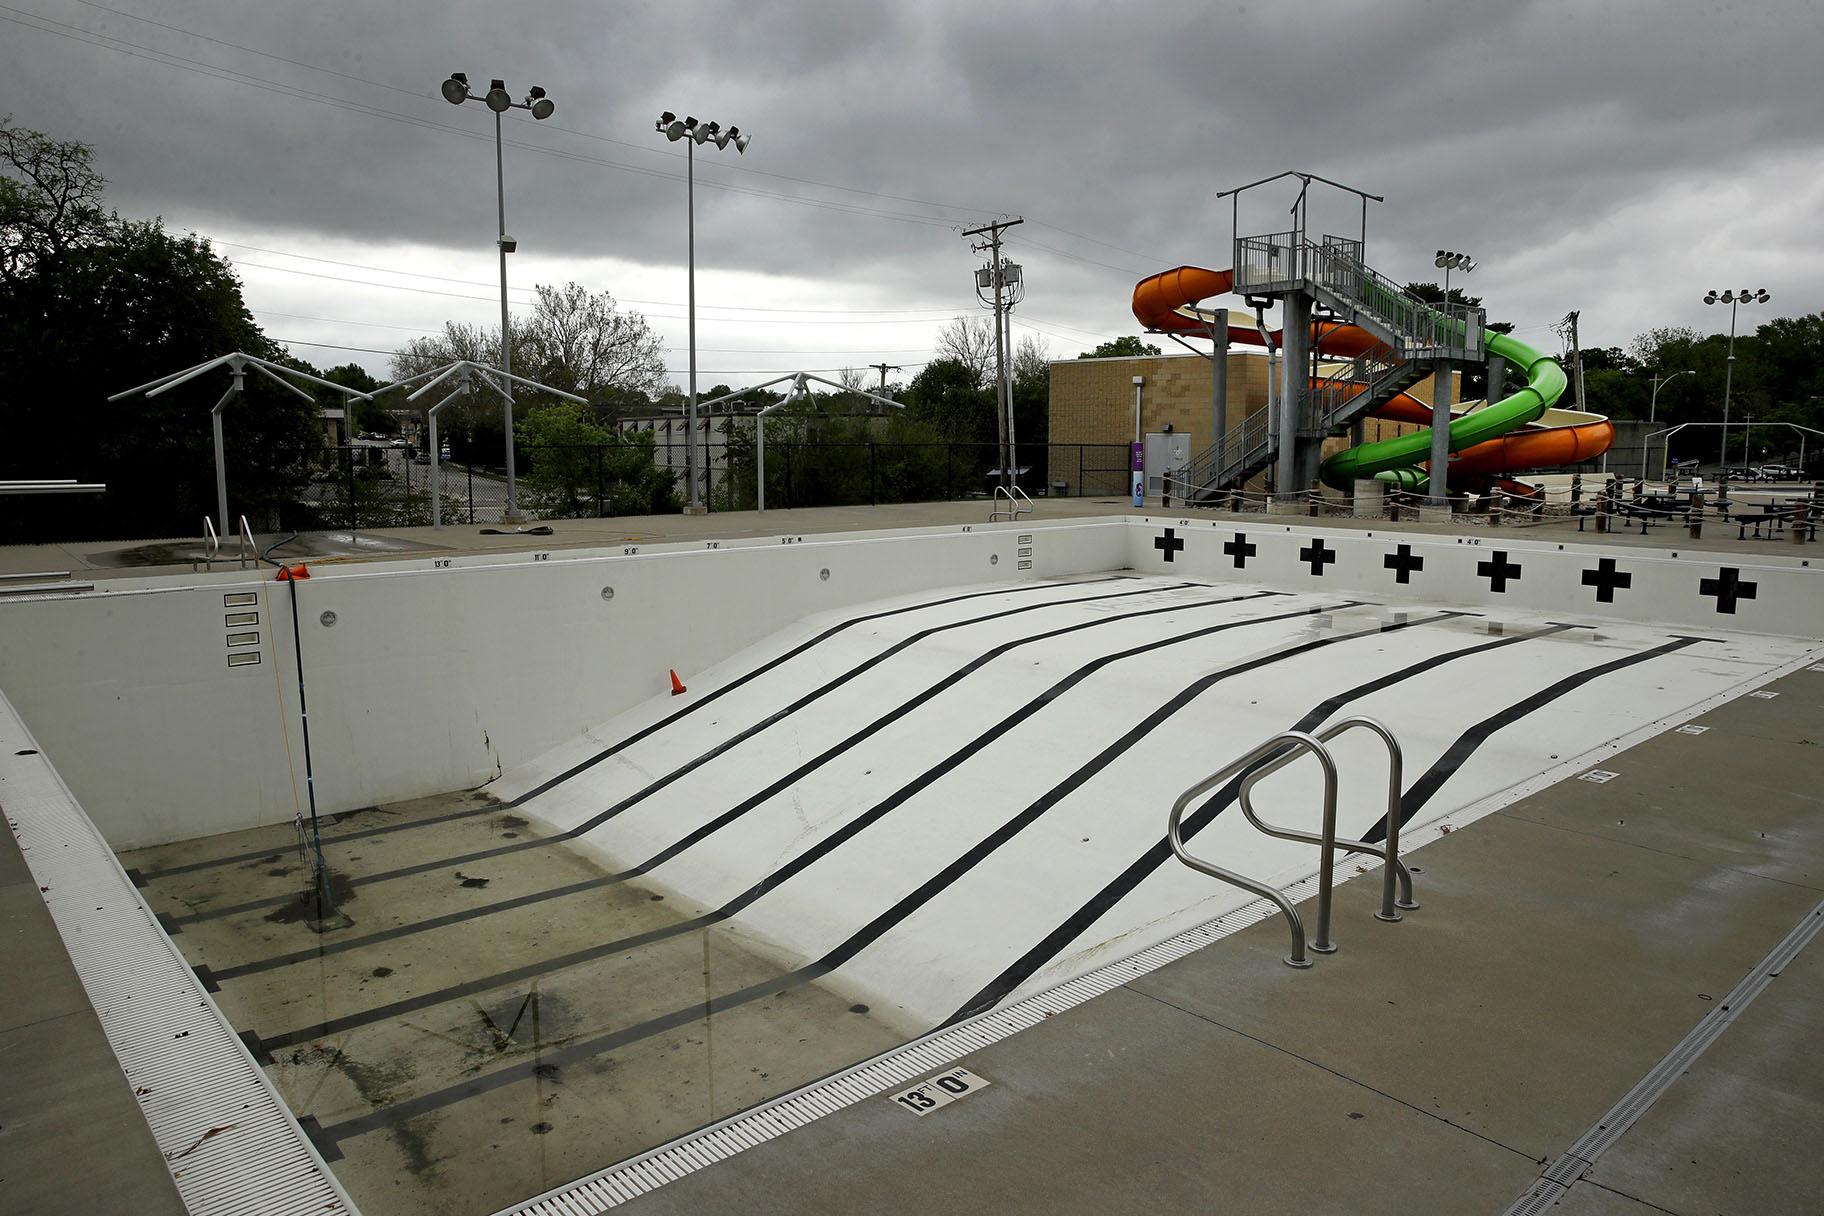 In this photo taken Friday, May 15, 2020, the public pool in Mission, Kan. is lifeless as plans remain in place to keep the pool closed for the summer to help prevent the spread of COVID-19. (AP Photo / Charlie Riedel)